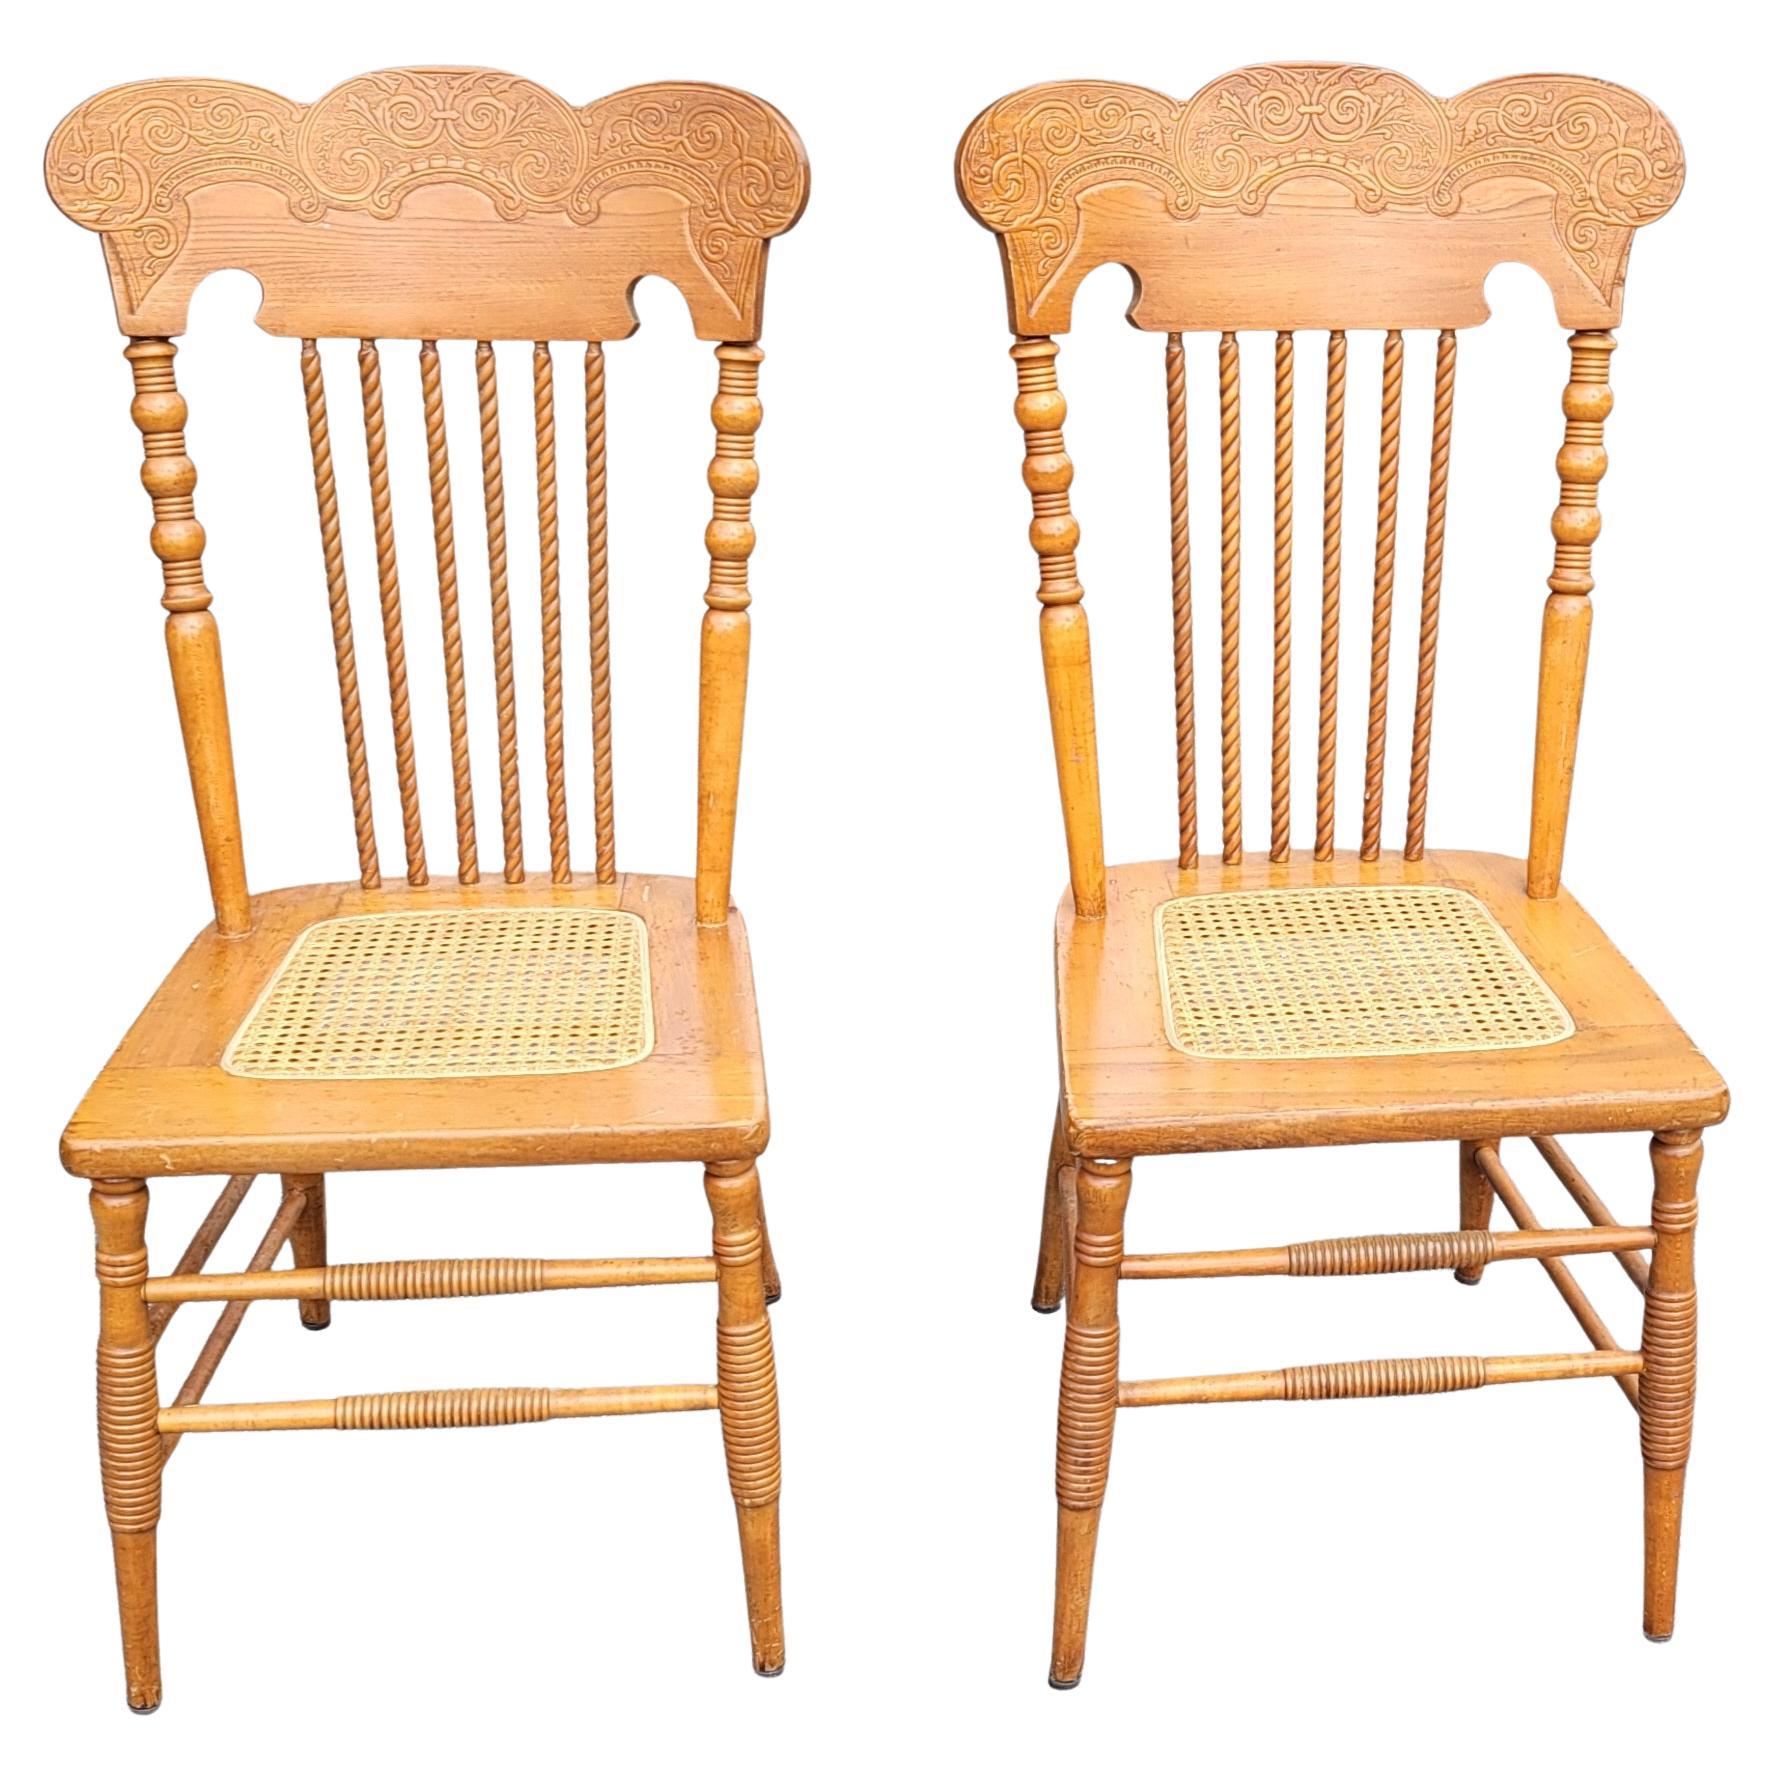 A recently refinished pair of Victorian style press back spiral maple chairs with cane seat. Cane has been redone. Feature a bobbing back supports with spiral spindles. Absolutely gorgeous pair that may may be used as needed in your dining room or